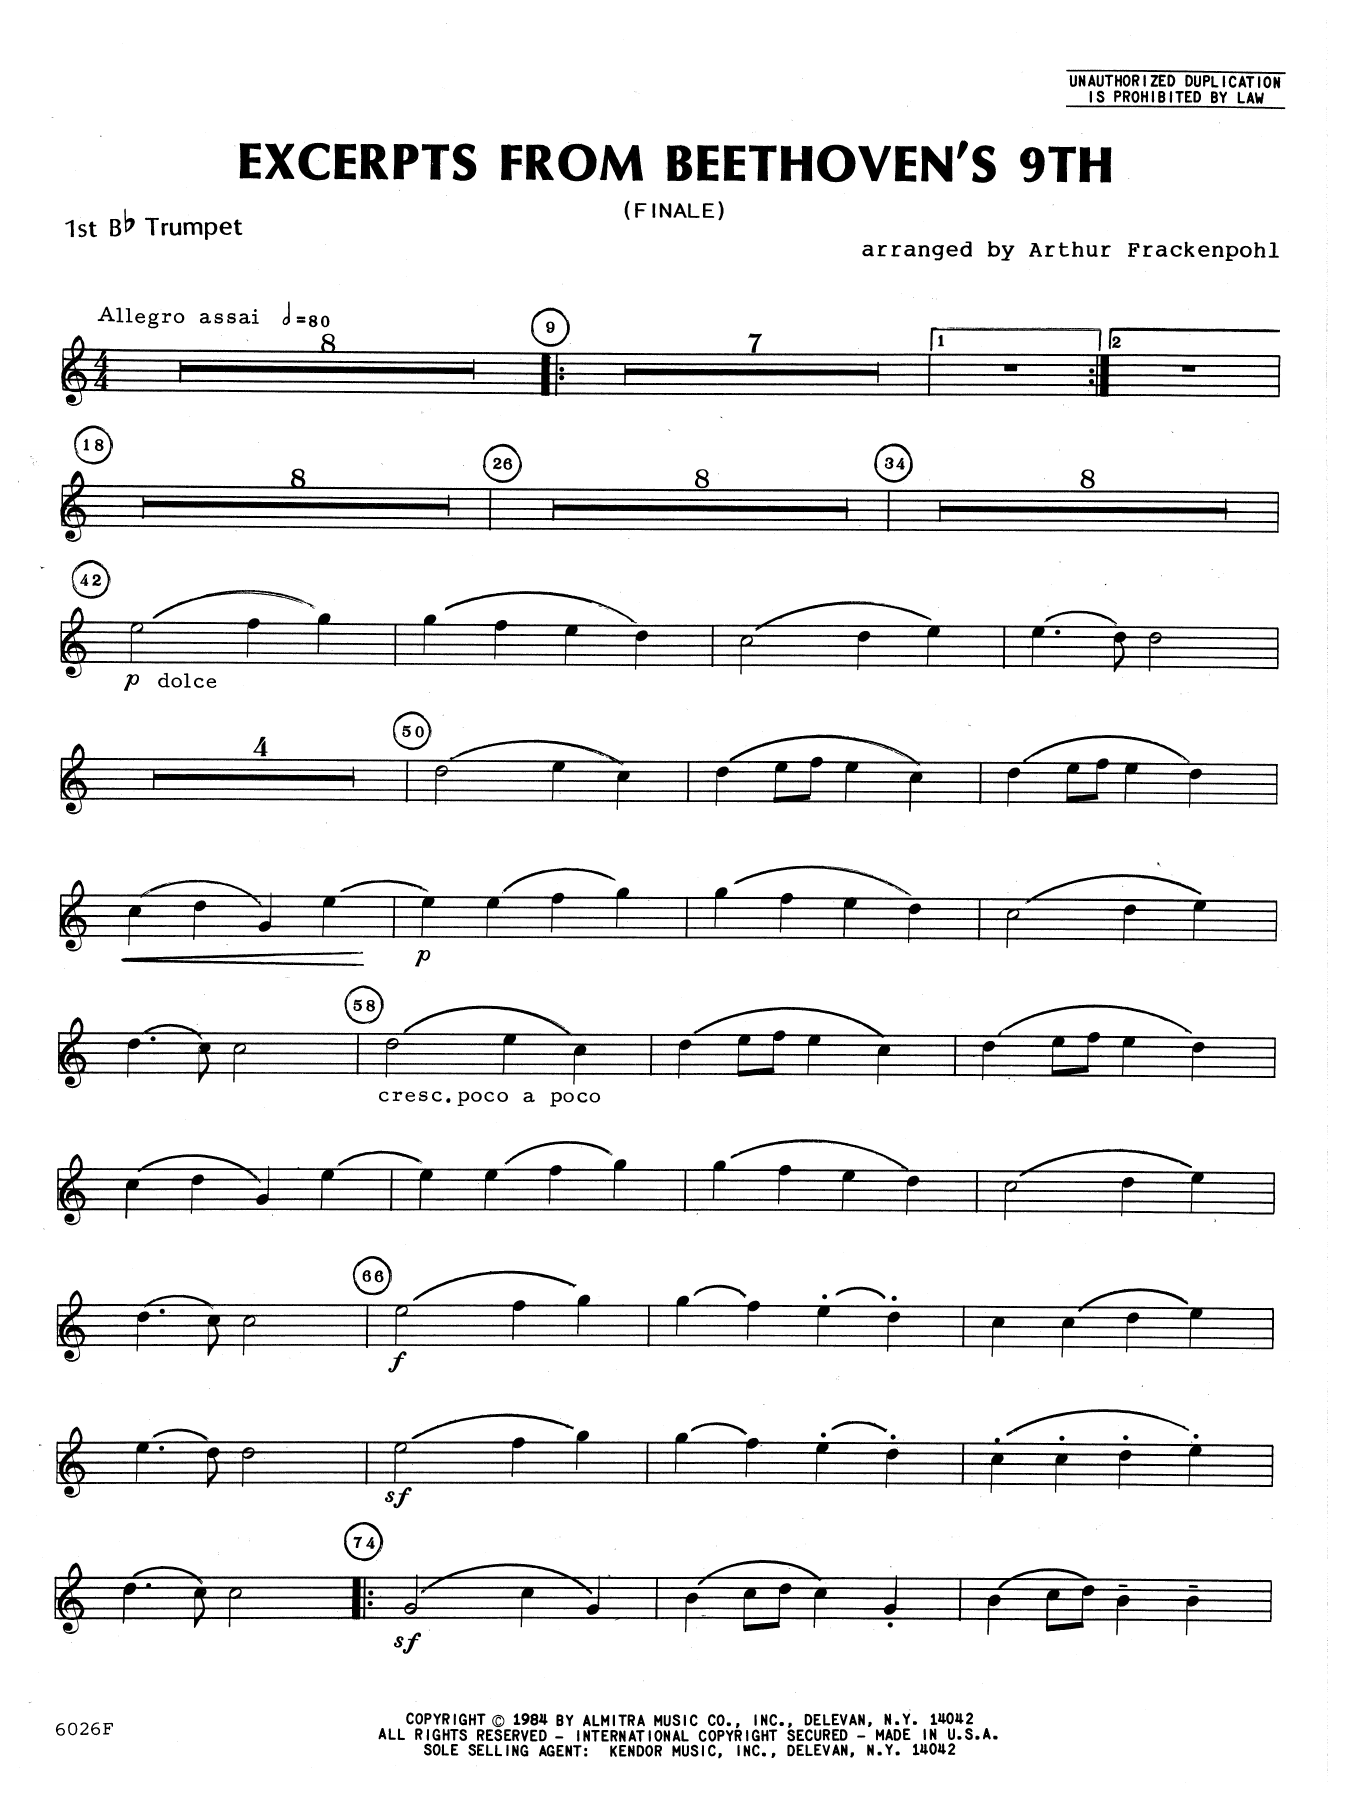 Download Arthur Frackenpohl Excerpts From Beethoven's 9th - 1st Bb Sheet Music